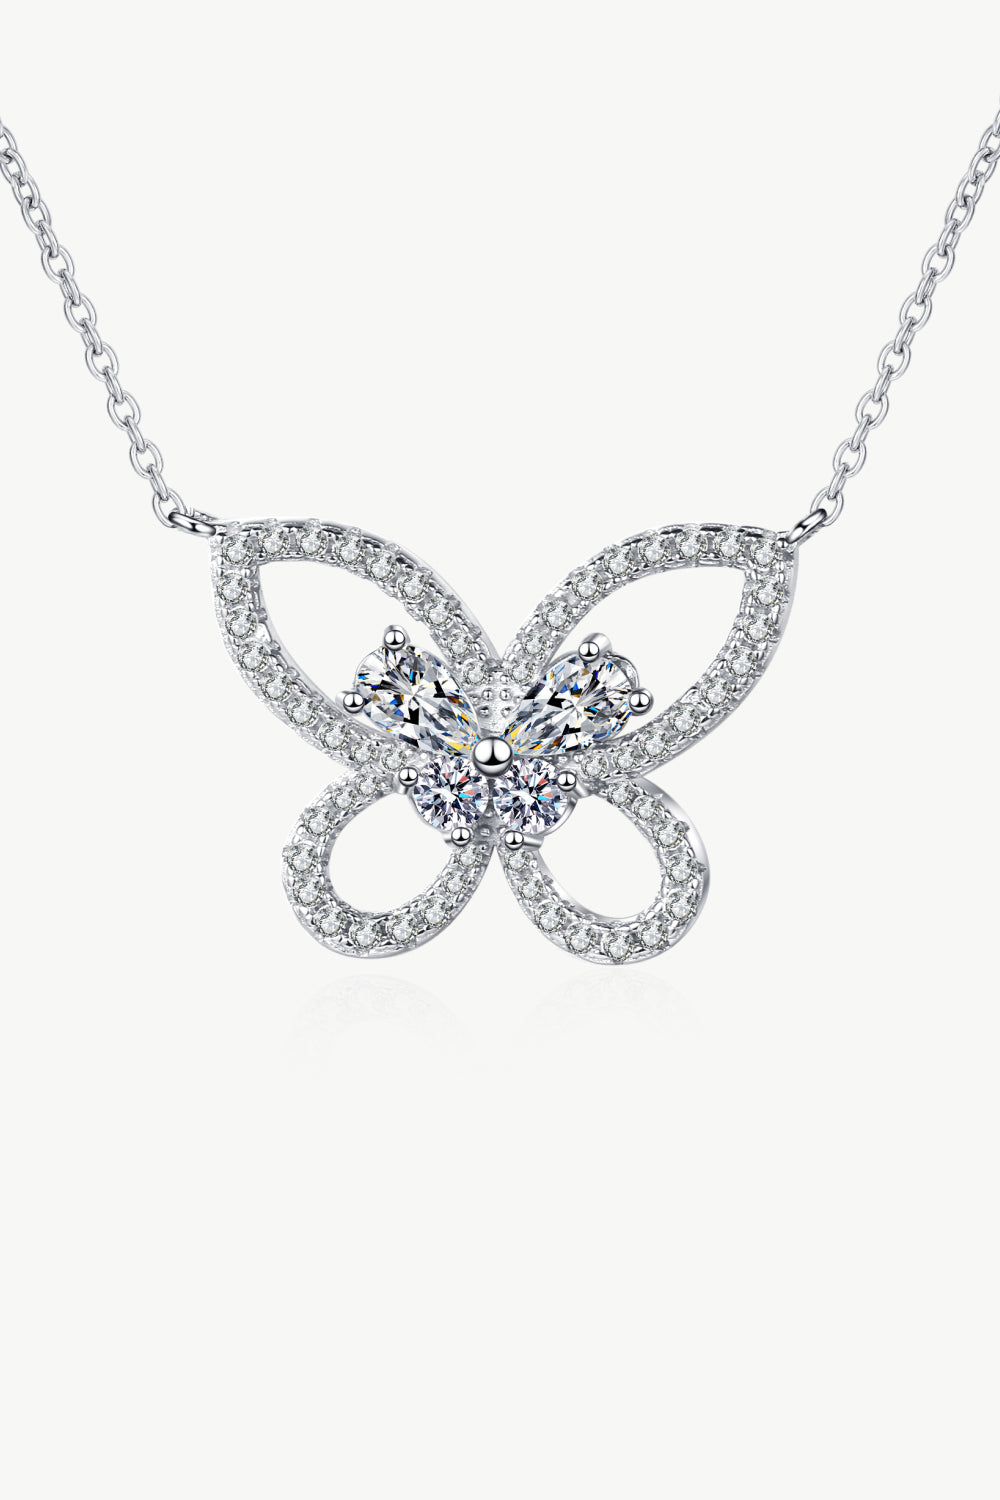 Moissanite Butterfly Pendant Necklace Moissanite Jewelry Brides by Emilia Milan 